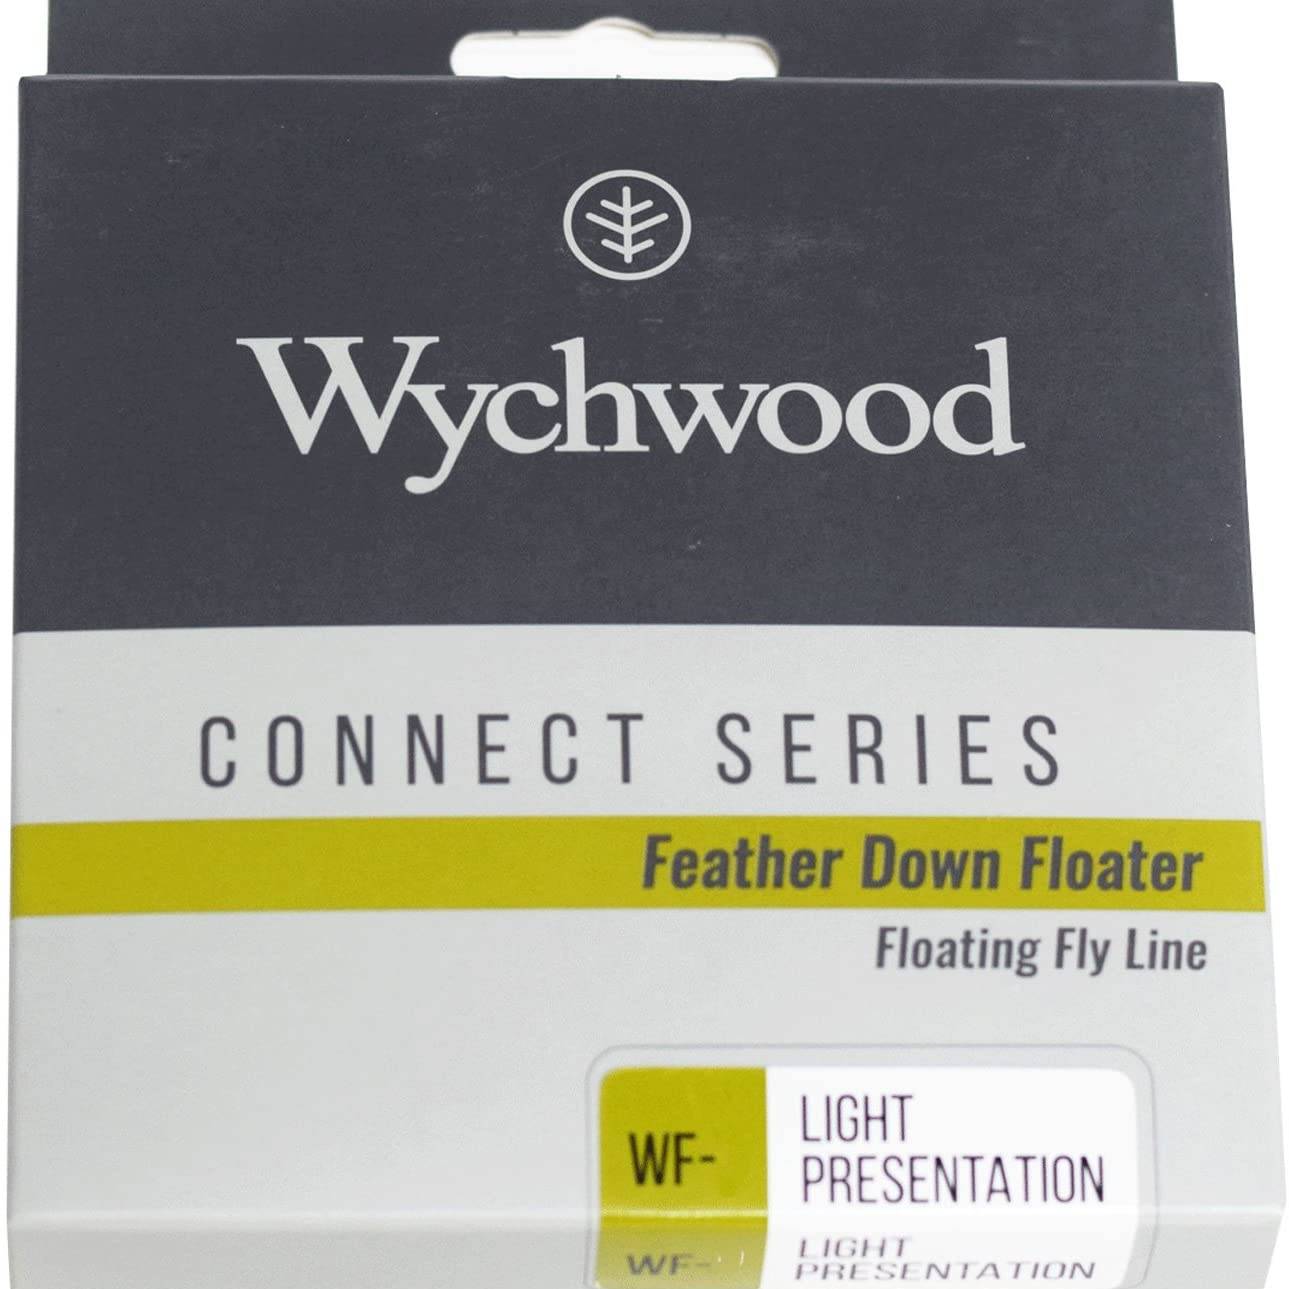 Feather Down Floater Fly Line WF5